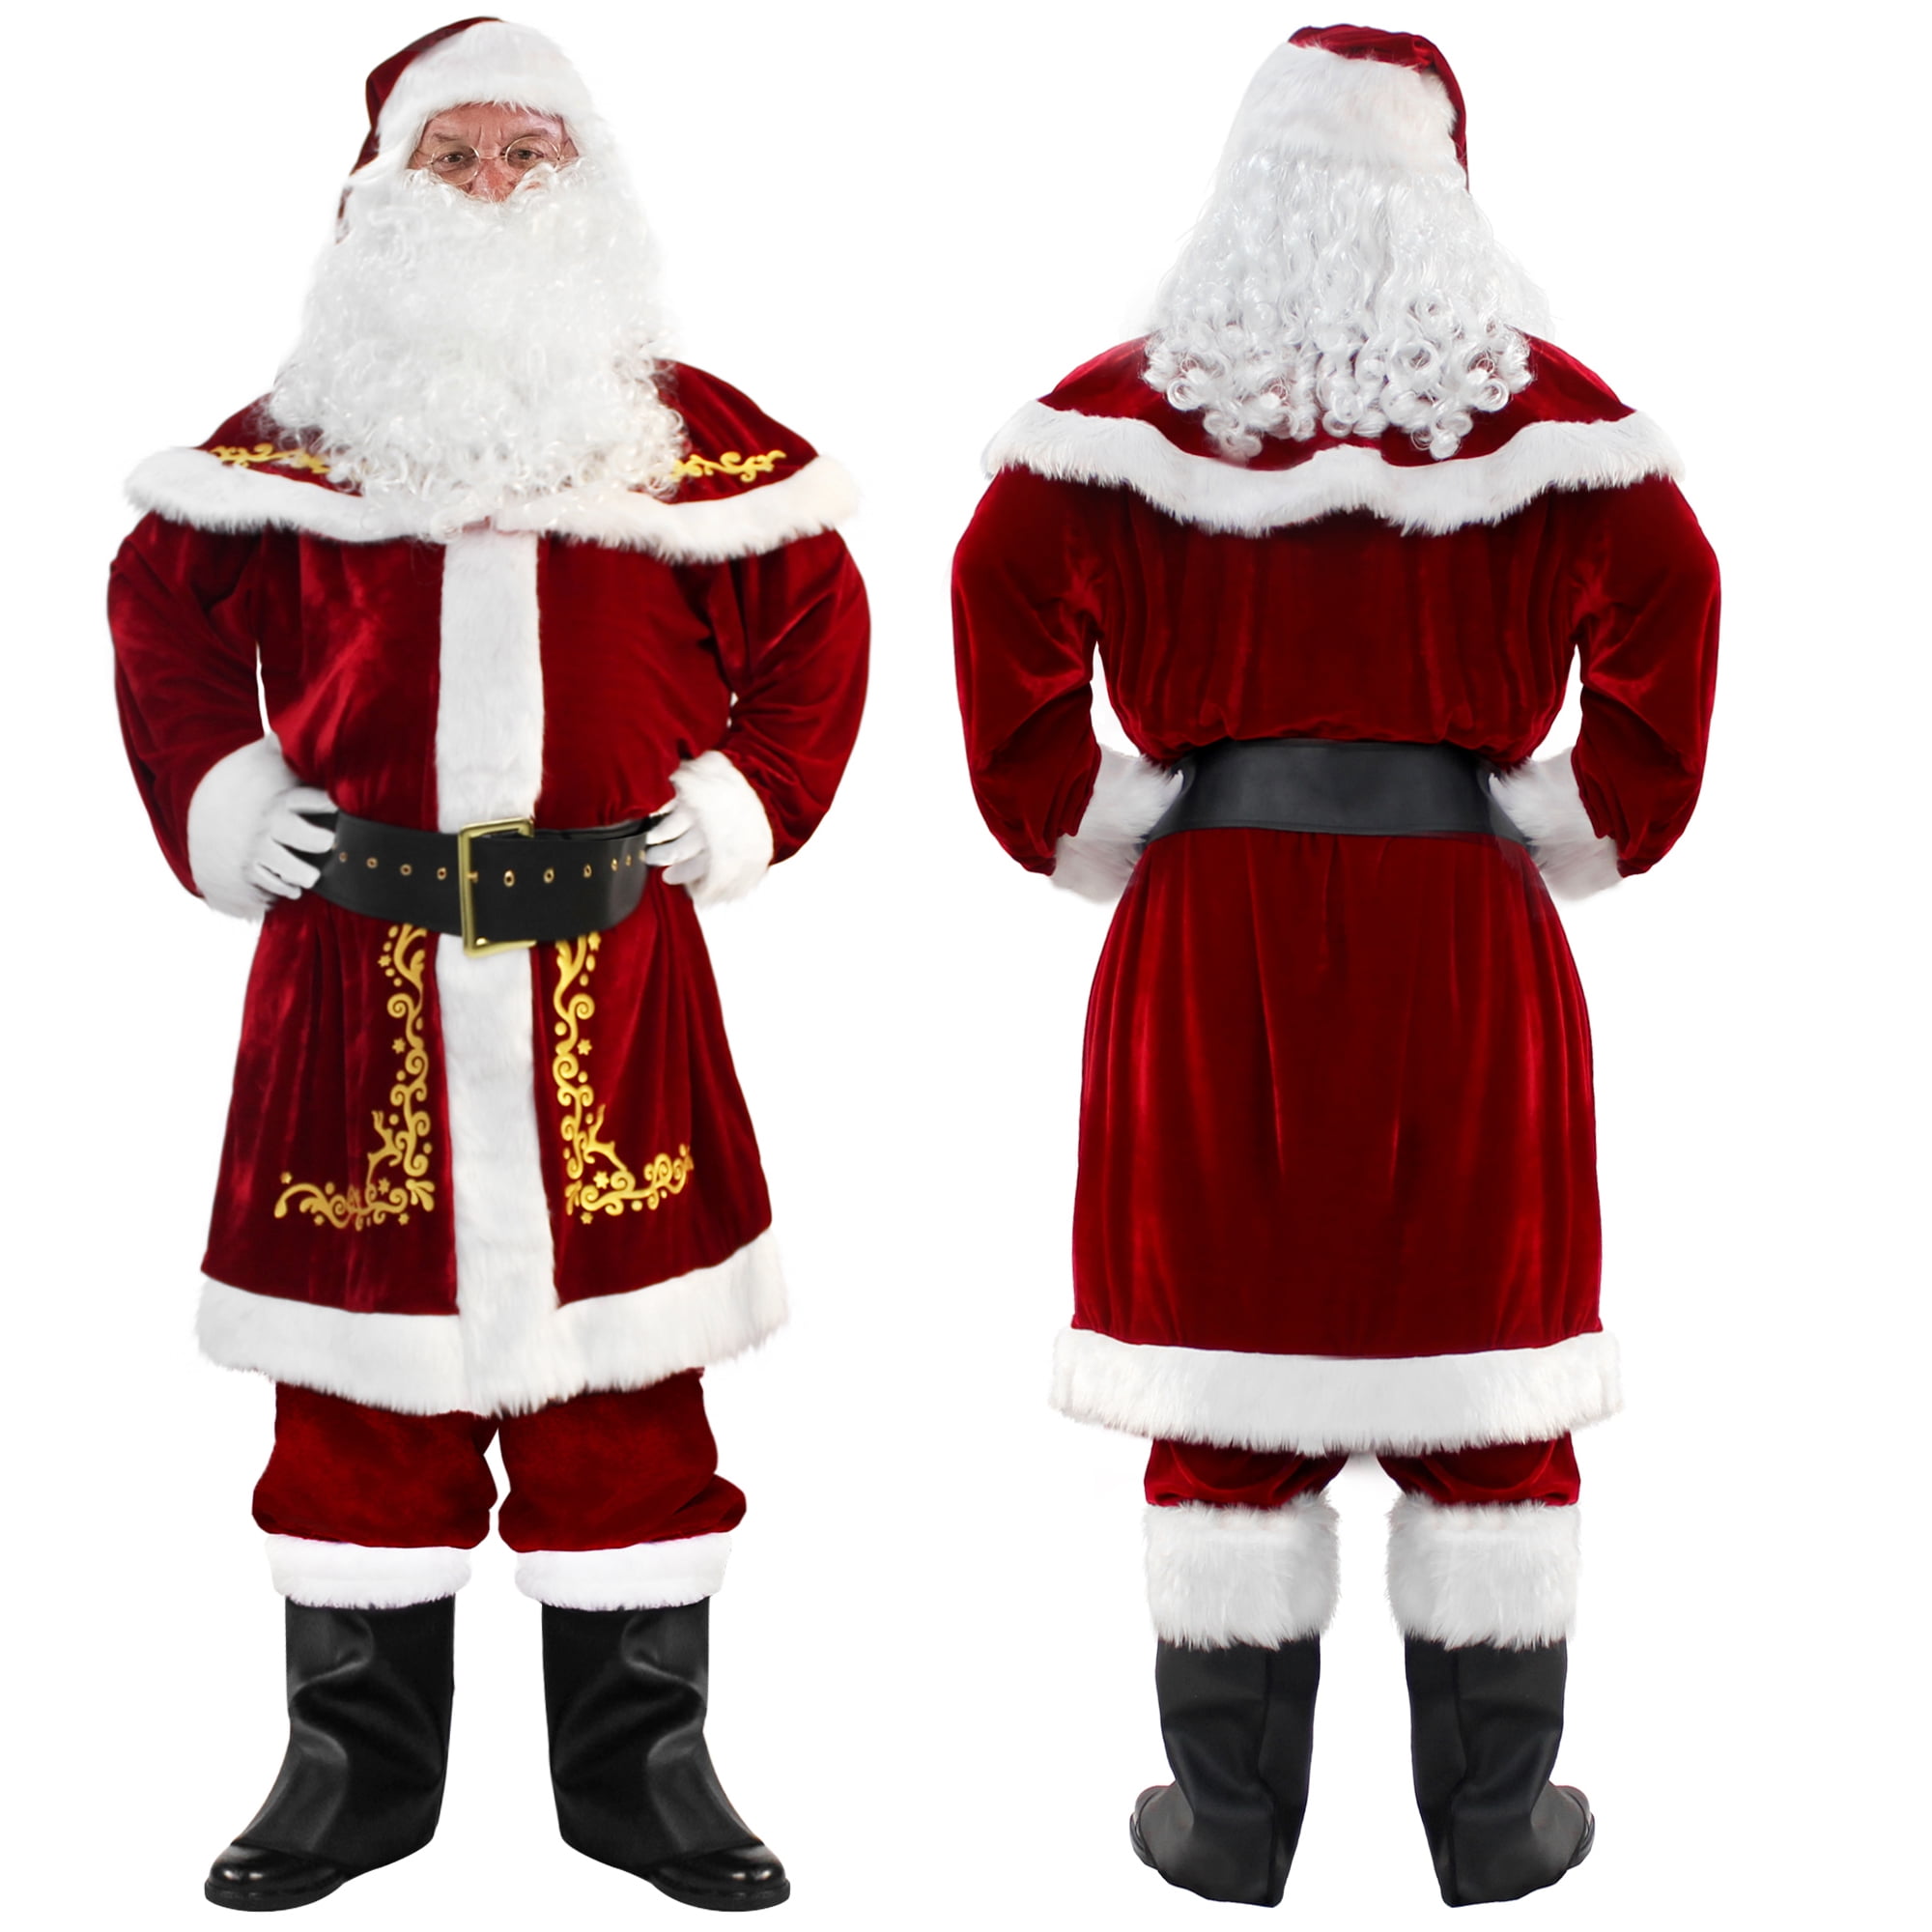 Santa Suit Deluxe Plush Adult Mens Christmas Holiday Halloween Costume 